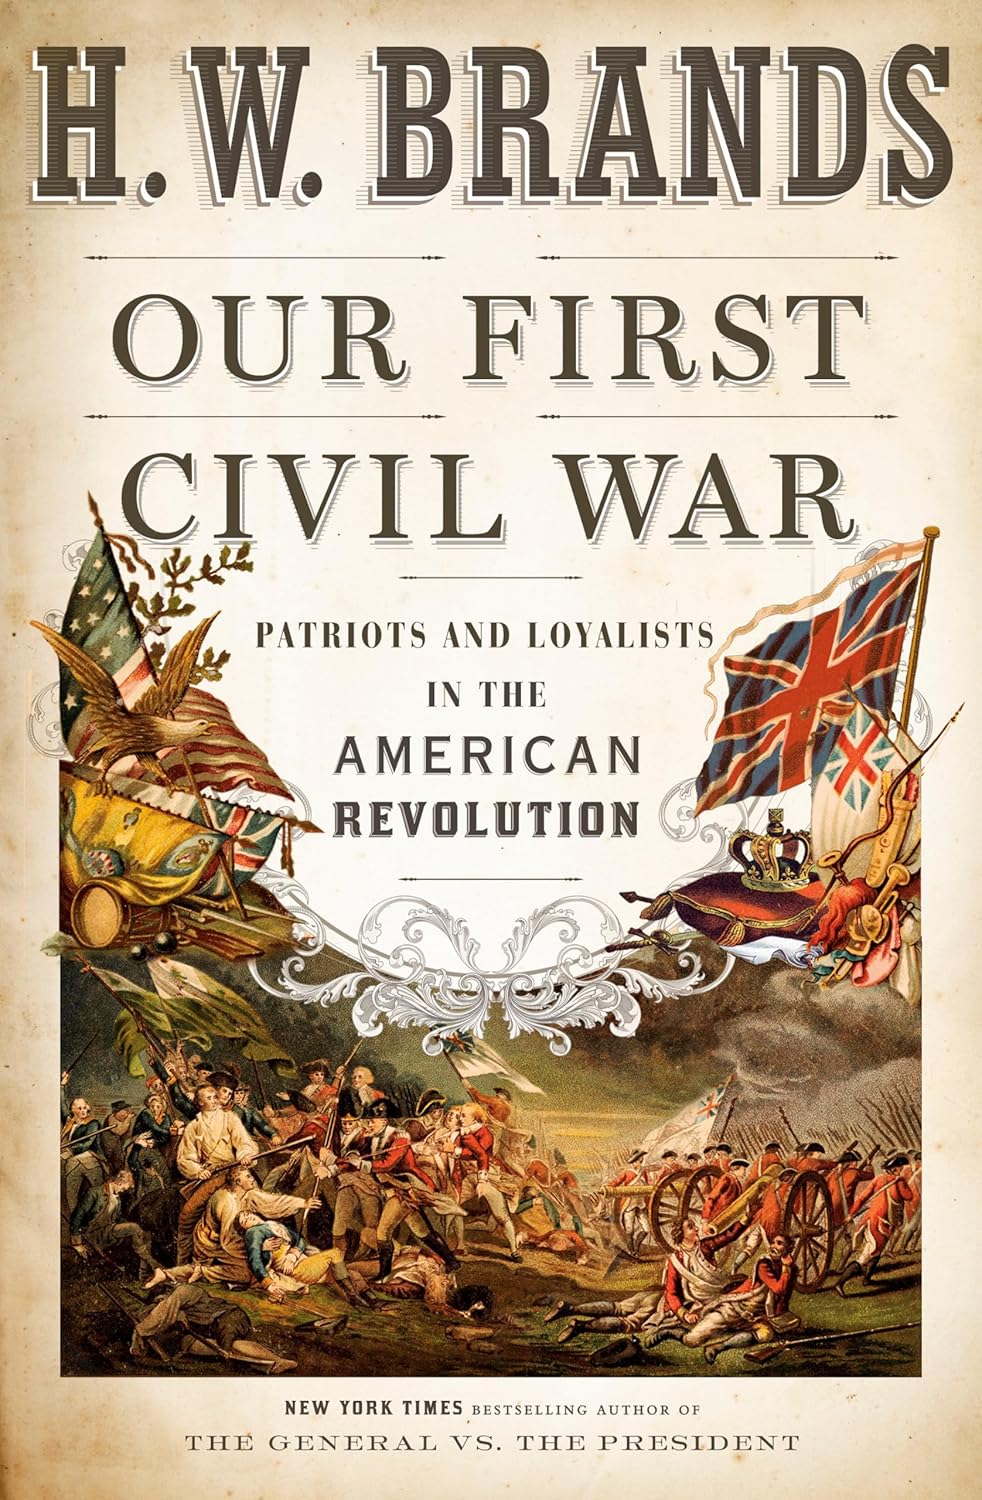 Our First Civil War: Patriots and Loyalists in the American Revolution by H. W. Brands